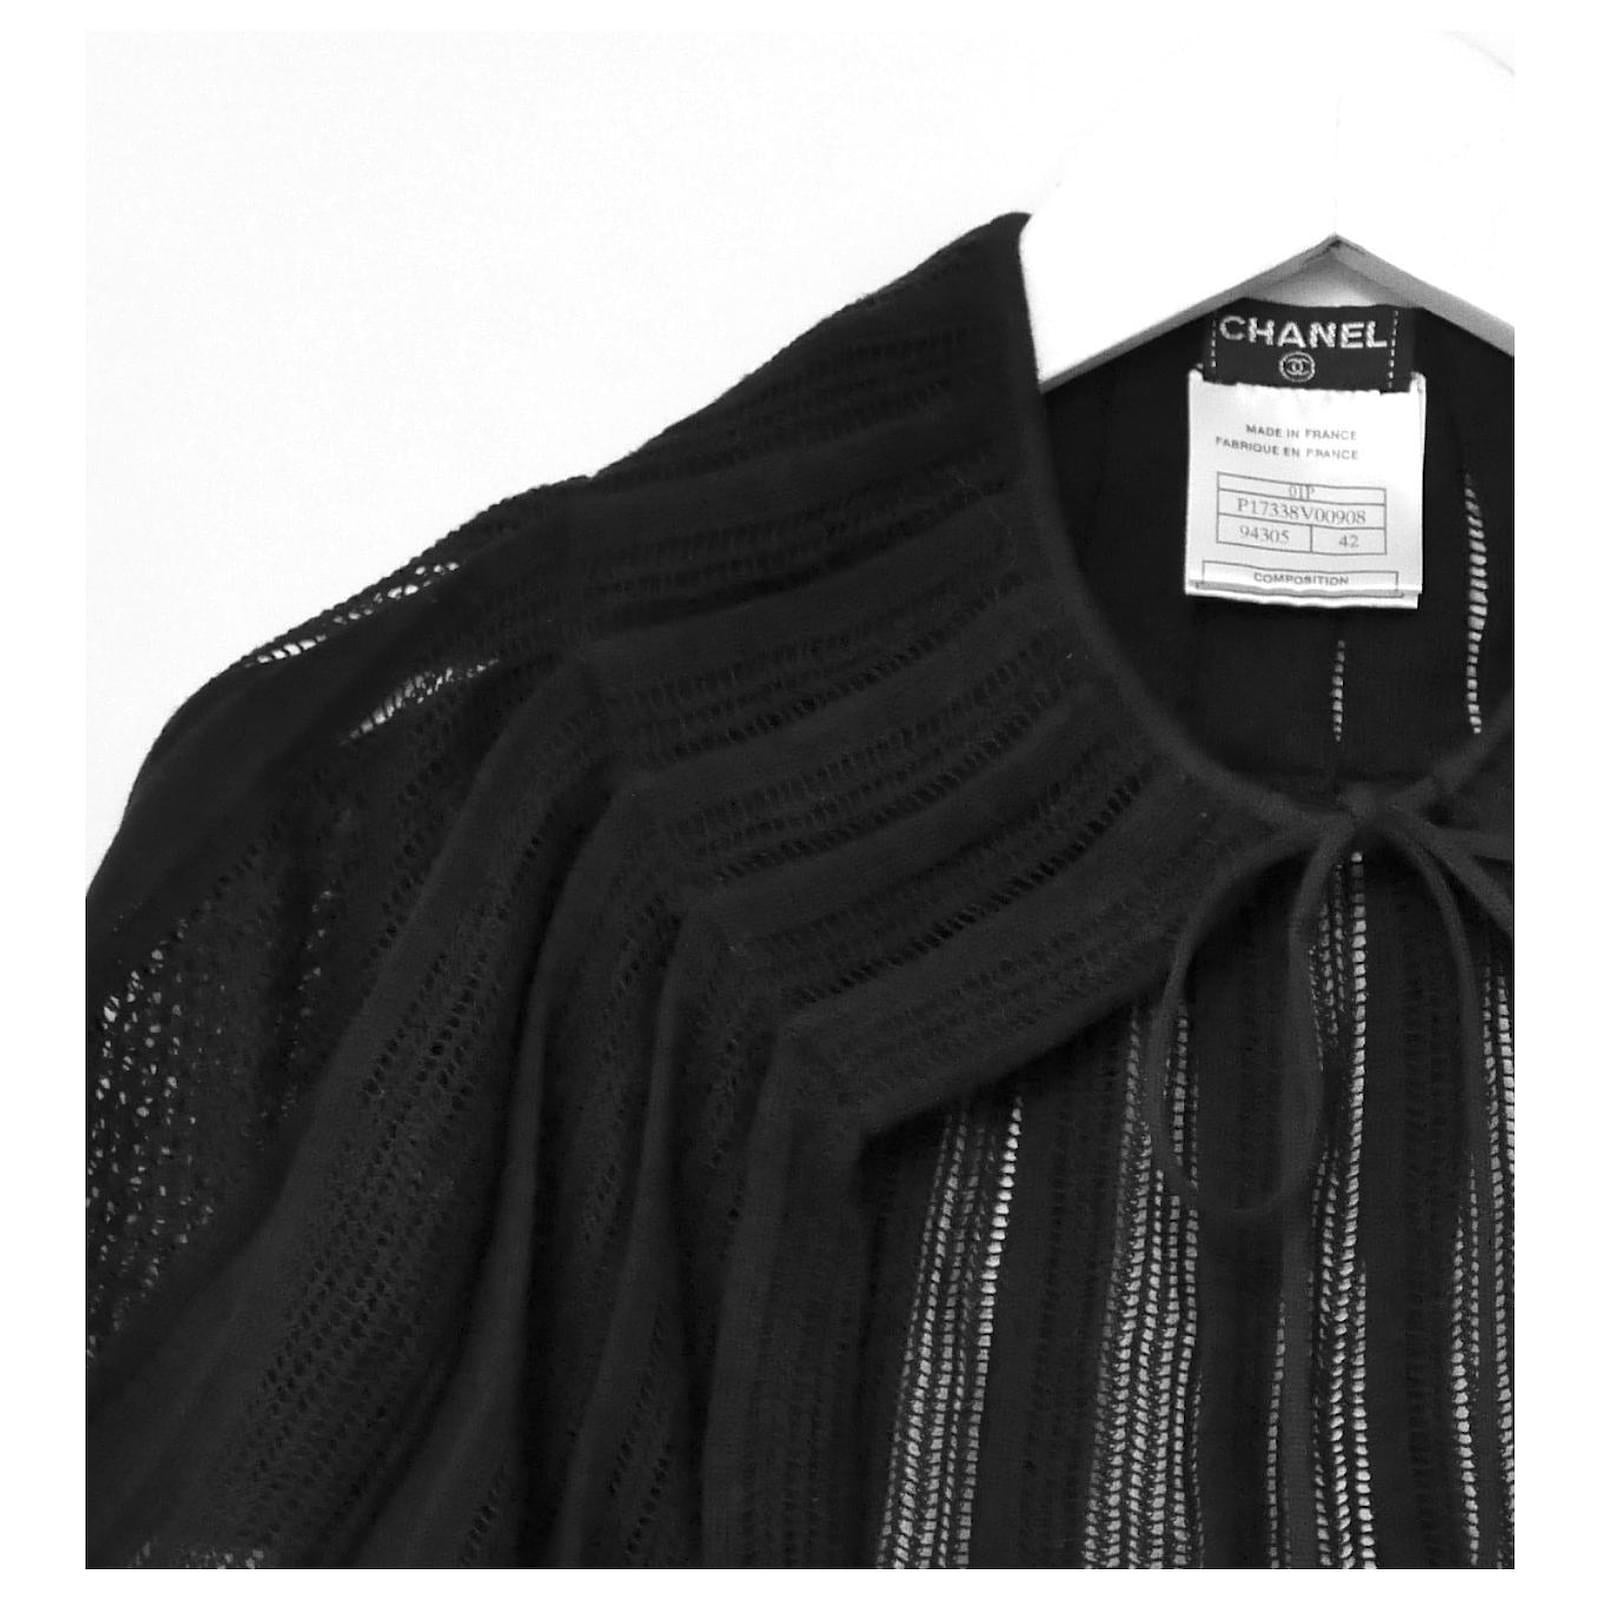 Exquisite mini cape or capelet from the Chanel Spring 2001 01P collection. 

In super rare unworn condition with original Chanel box and Chanel tissue. 

Made from soft black cotton with a super delicate waffle knit, it is pleated 
at the top to